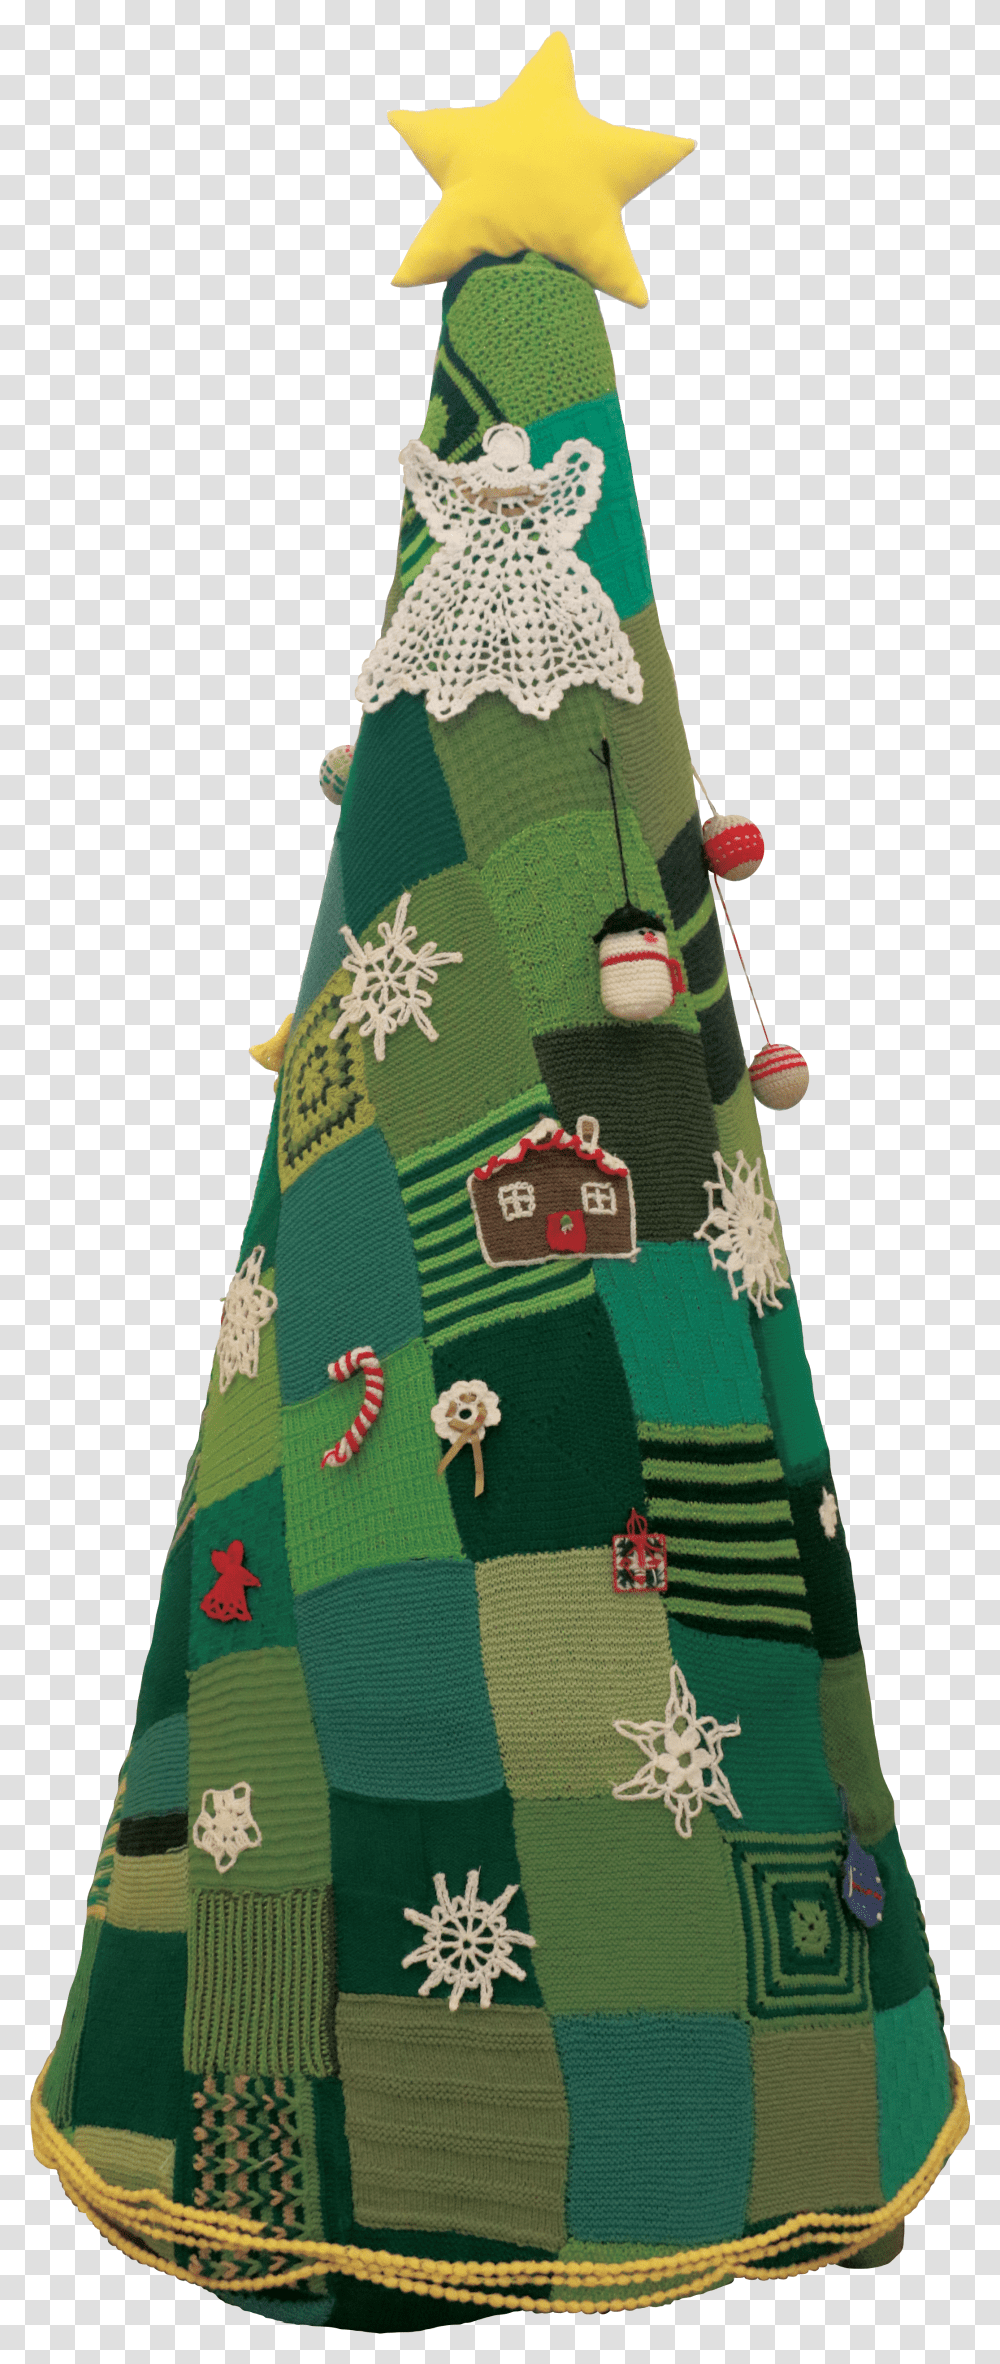 Doral Knits Its First Christmas Tree Christmas Tree Transparent Png